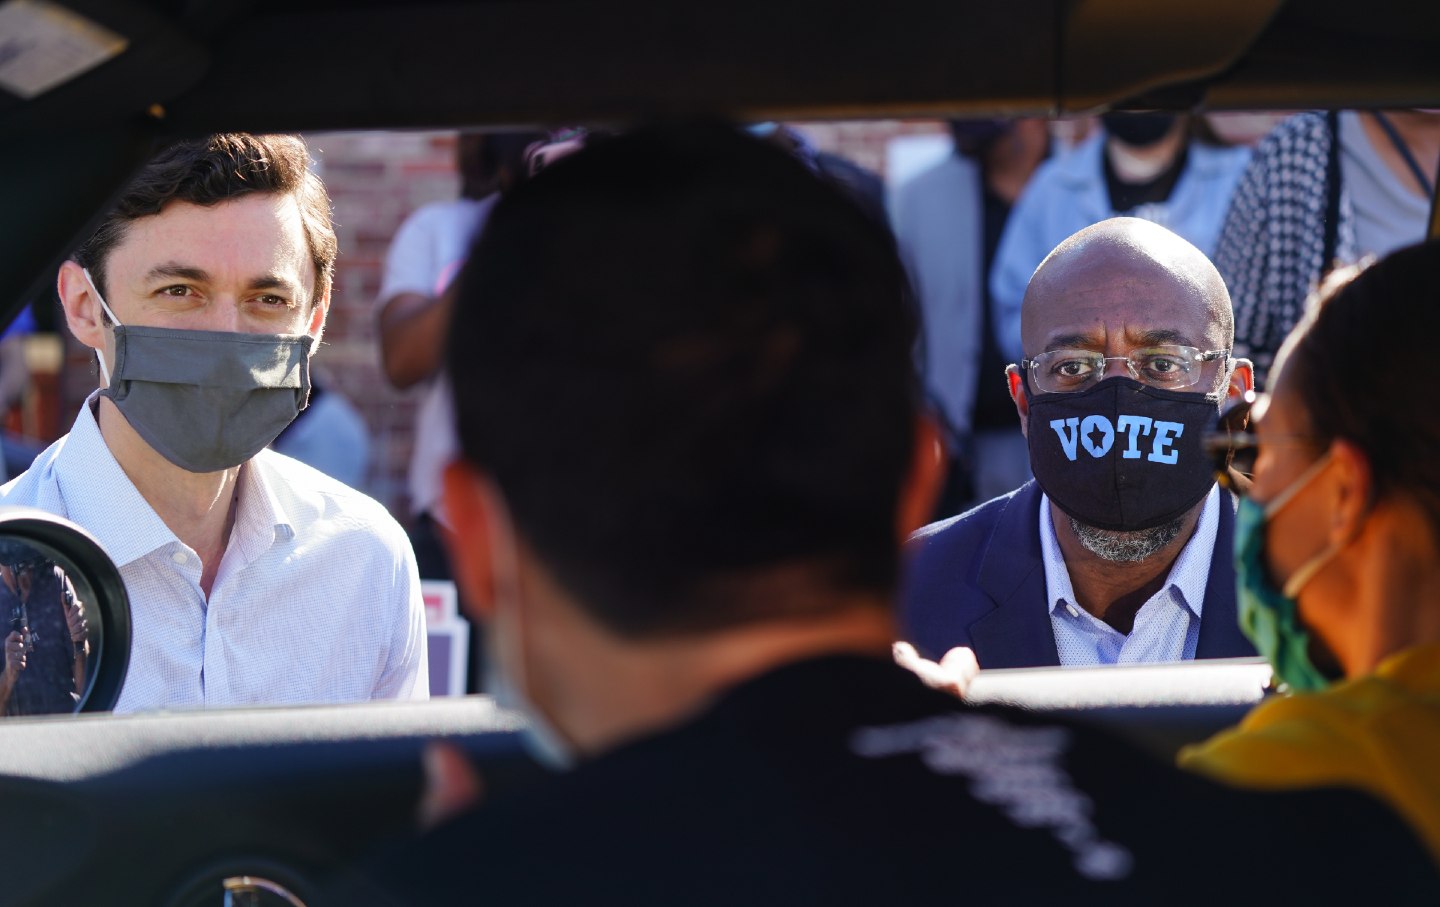 Jon Ossoff and Raphael Warnock, both wearing masks, speak to supporters who are seated in their car.